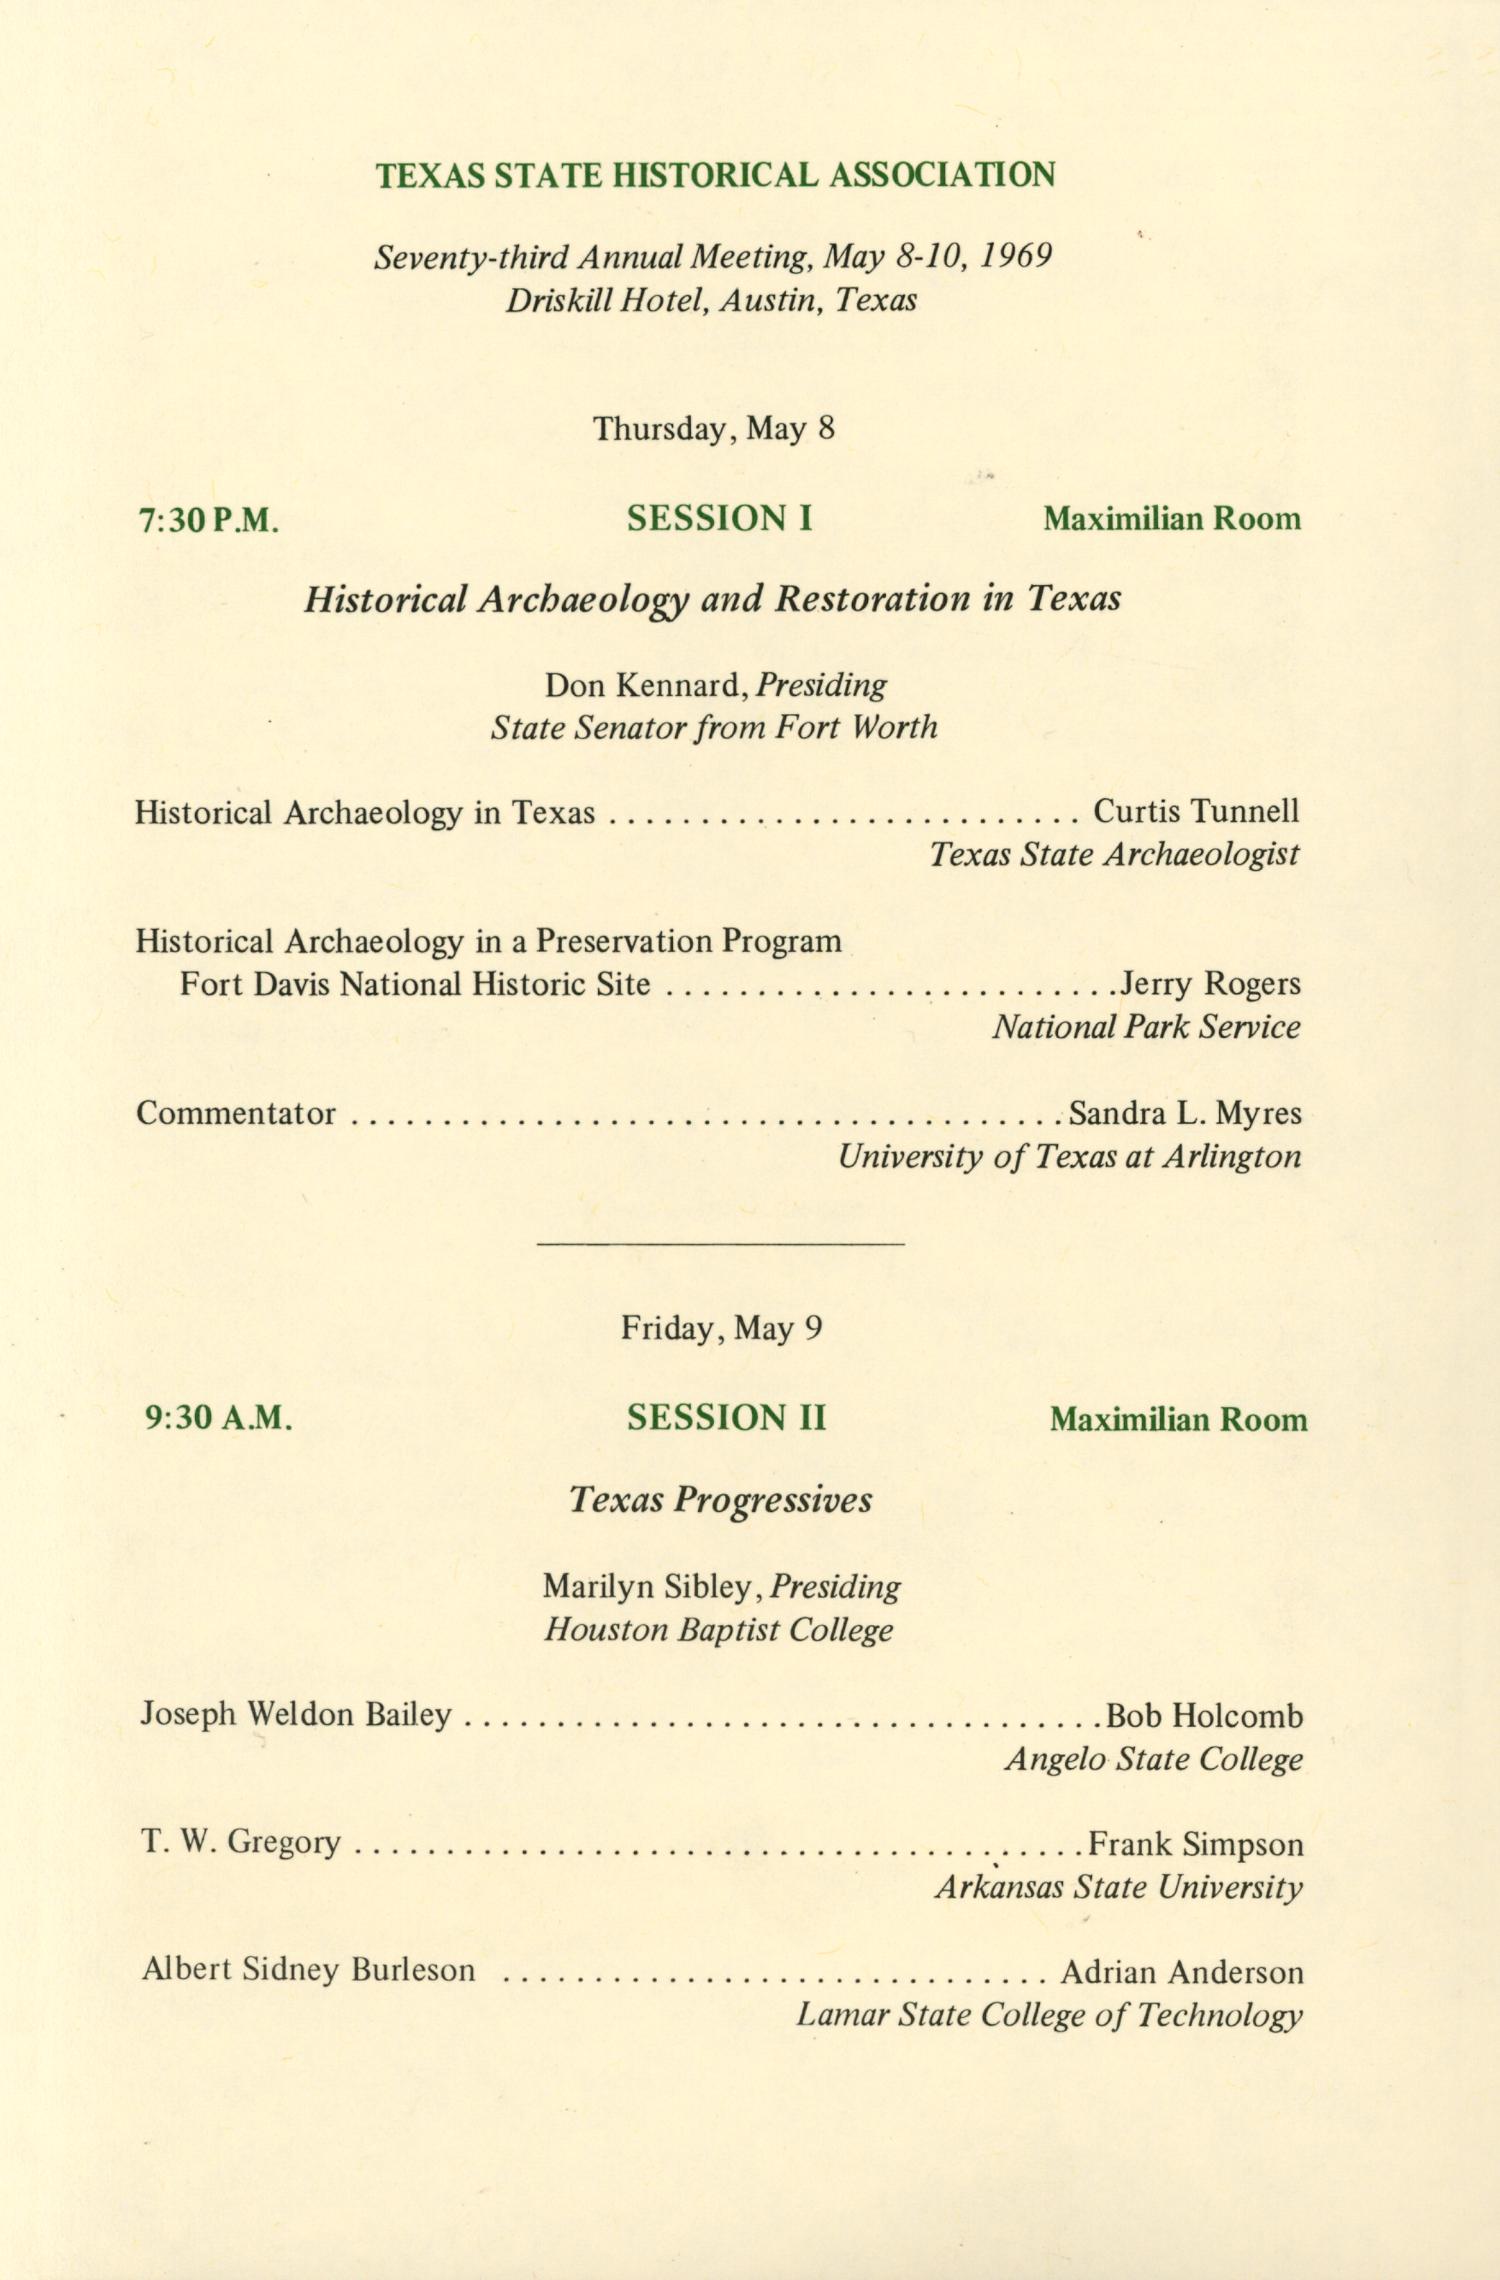 Texas State Historical Association Seventy-Third Annual Meeting, 1969
                                                
                                                    3
                                                